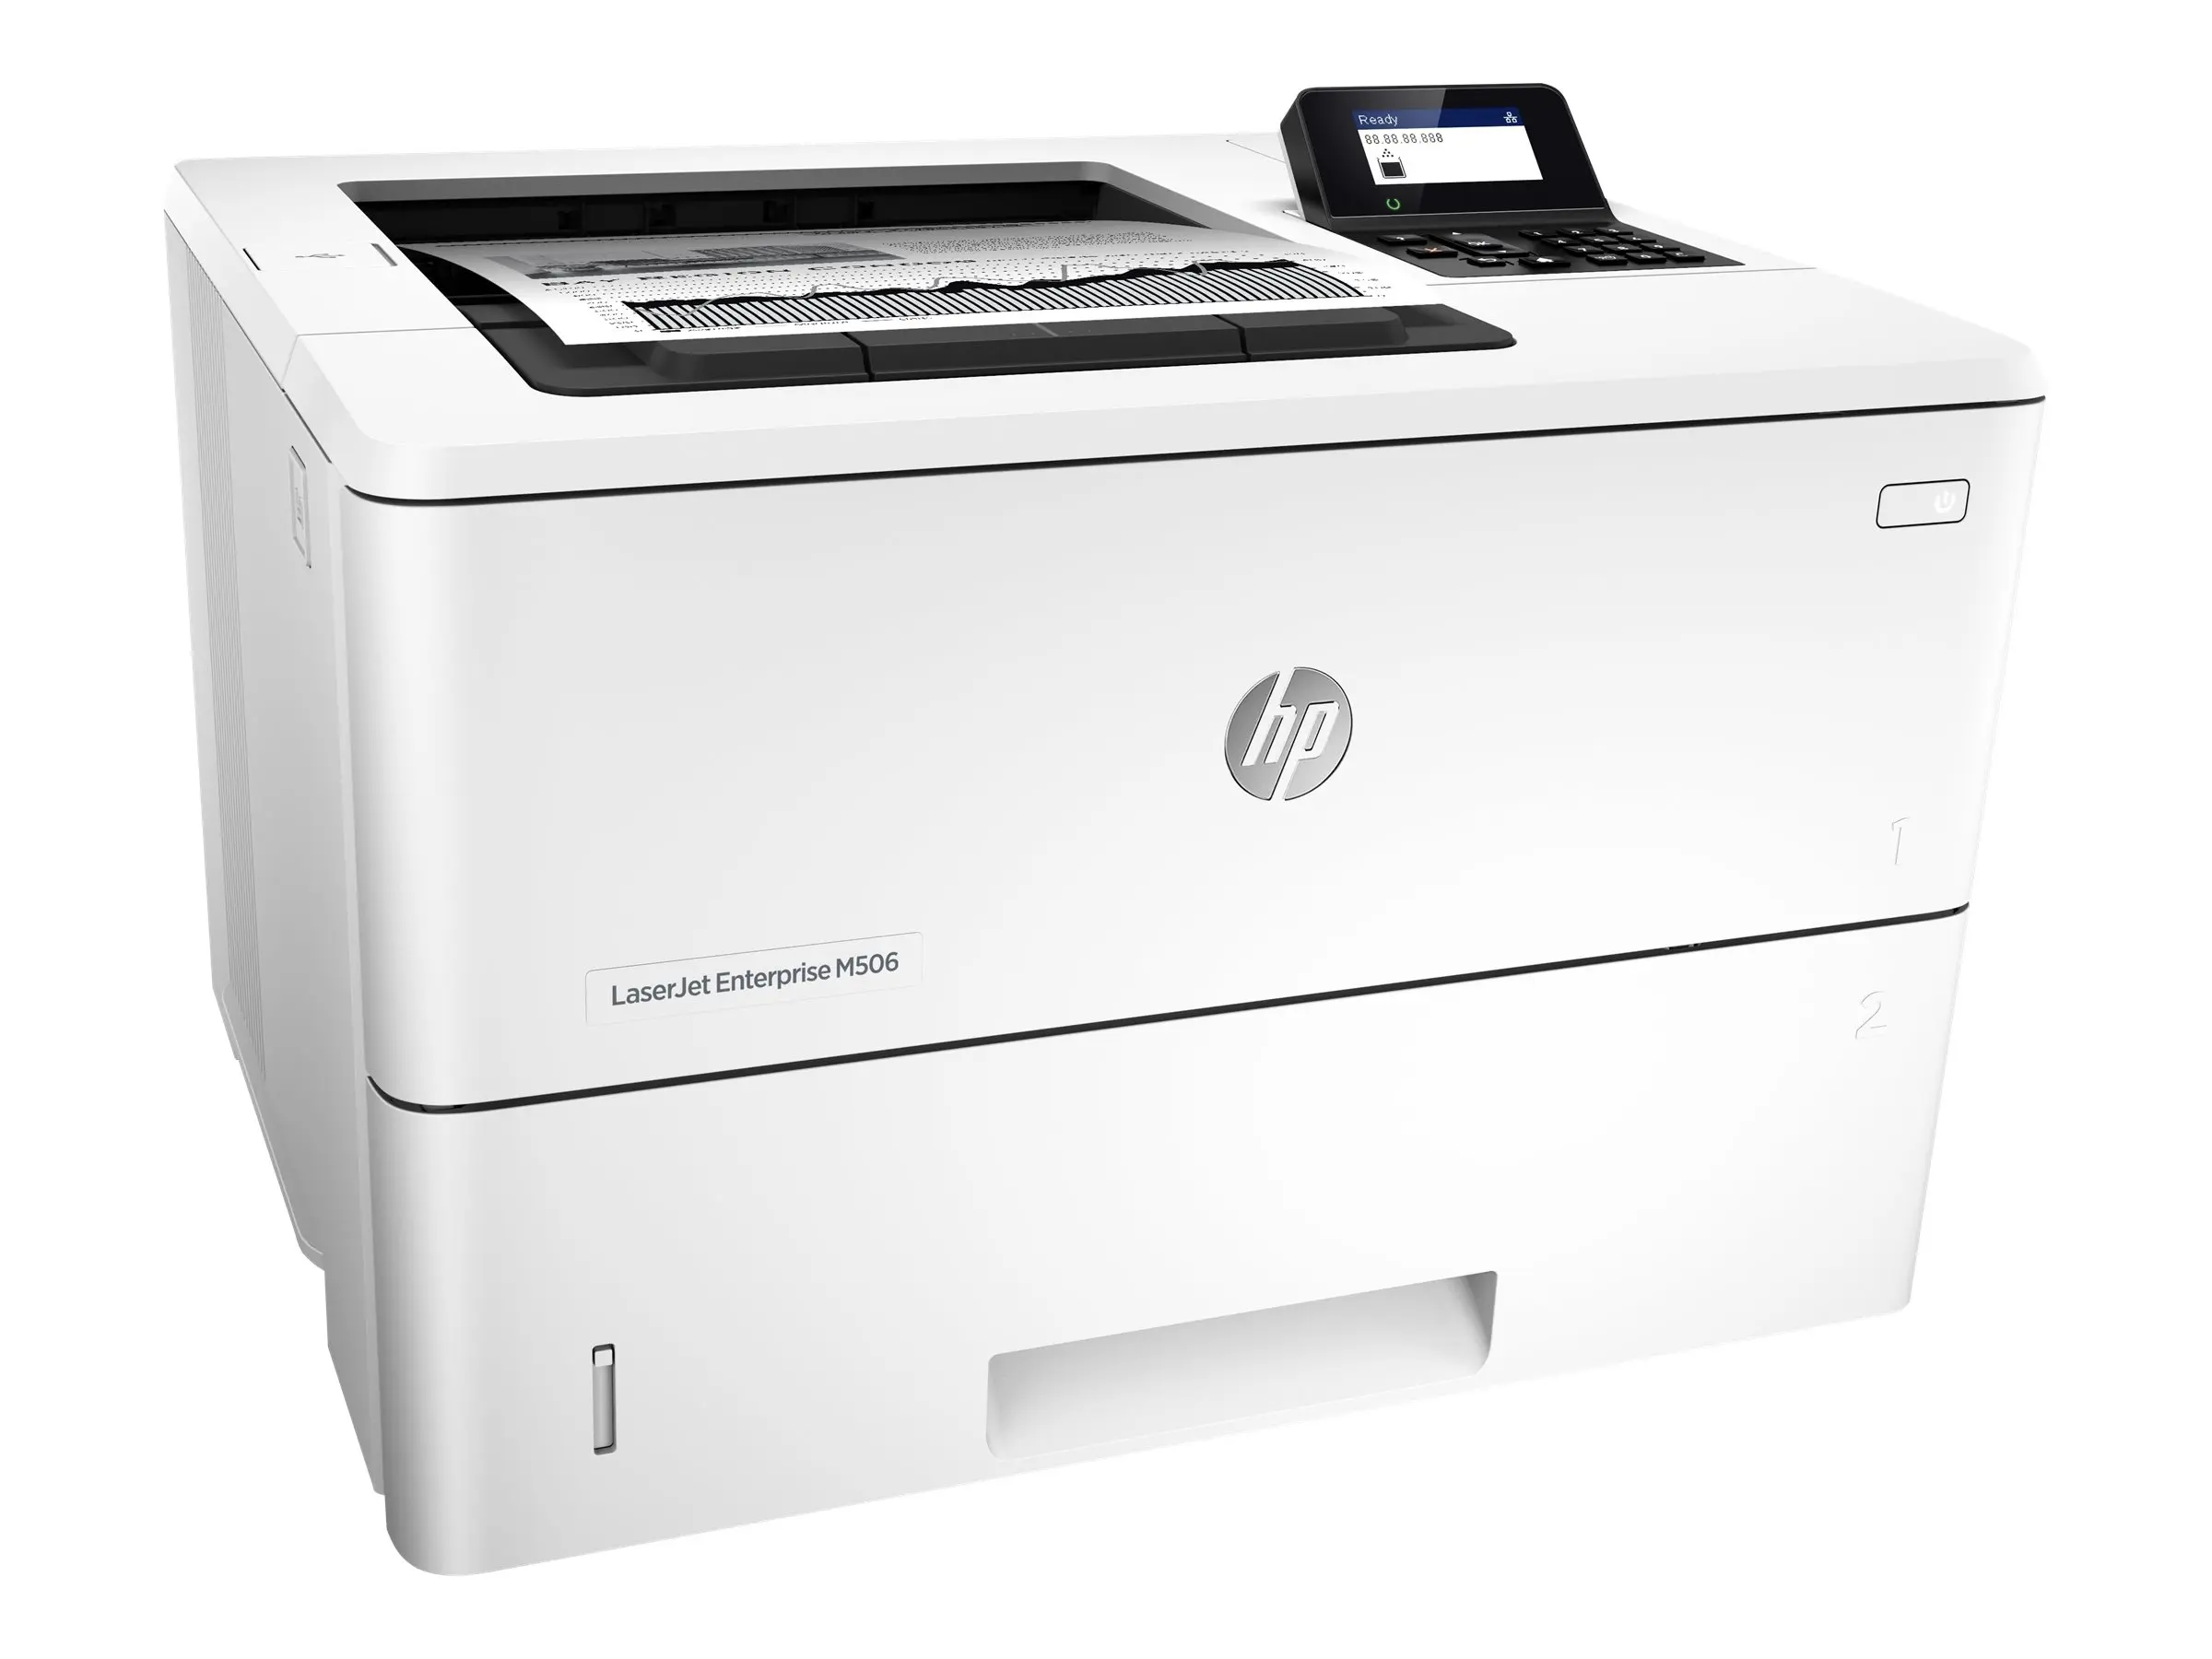 hewlett packard eprint m506 - How do I print the configuration page on my HP M506 printer